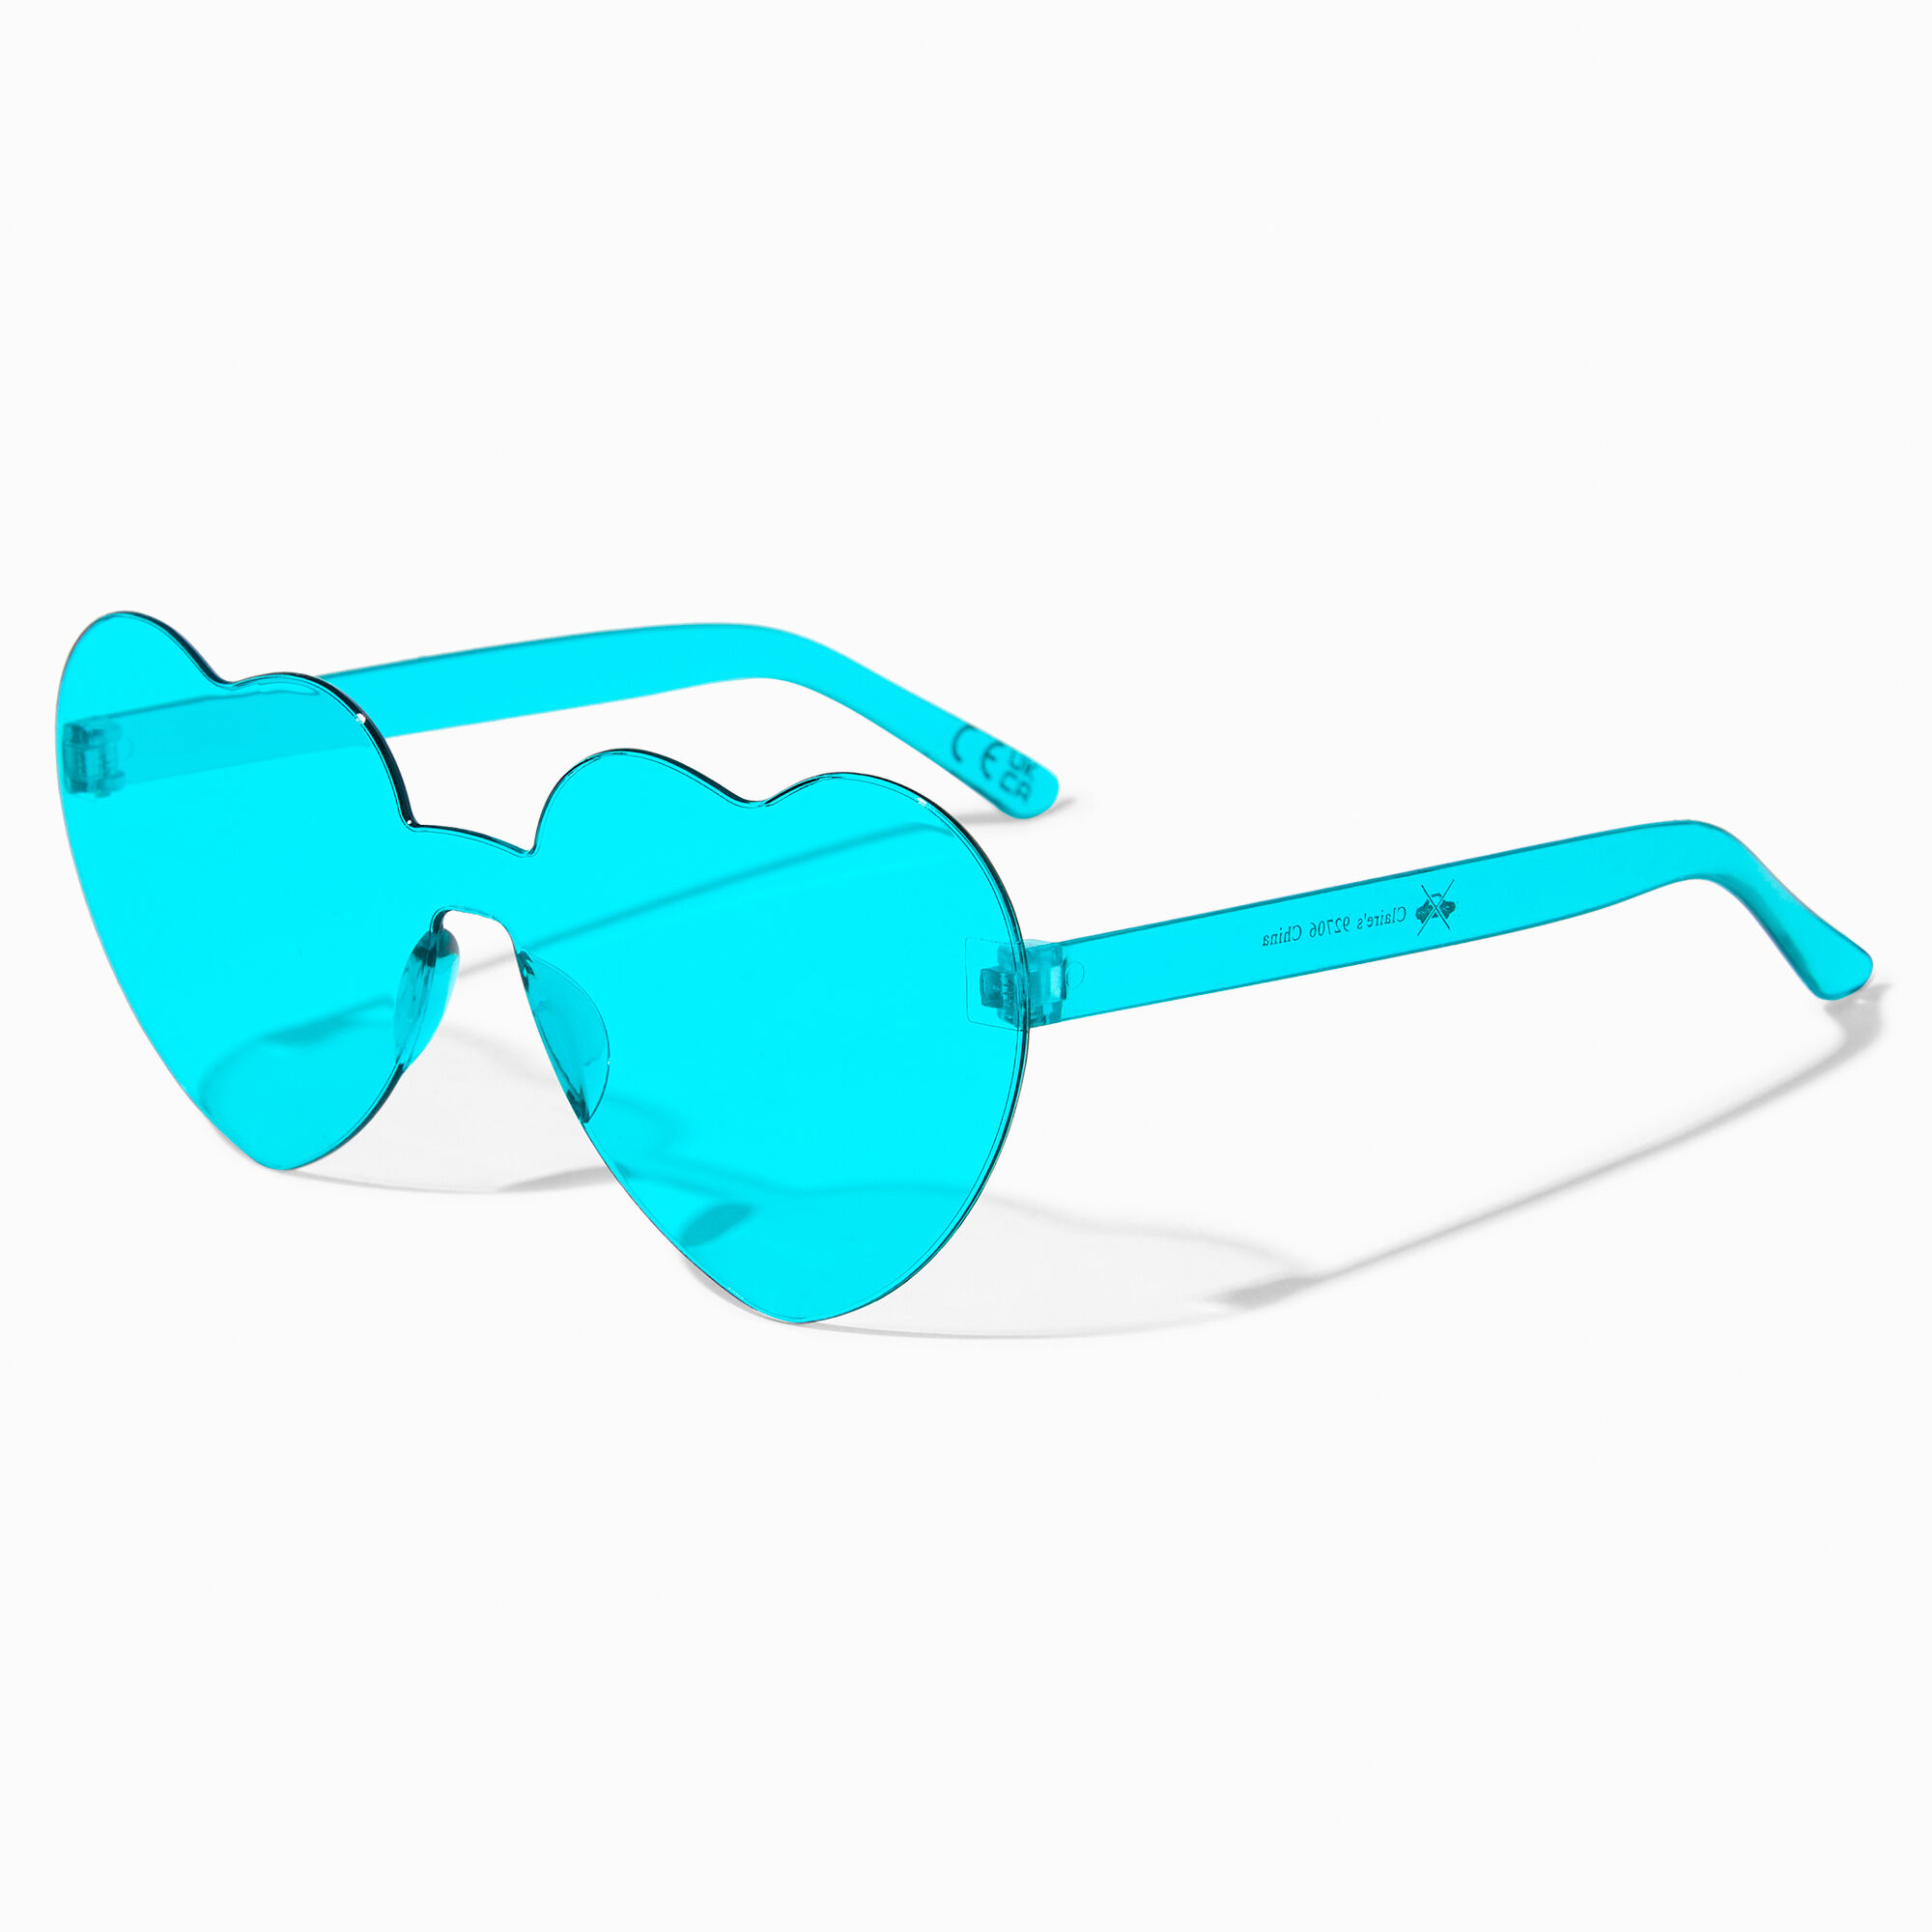 View Claires Heart Sunglasses Teal information